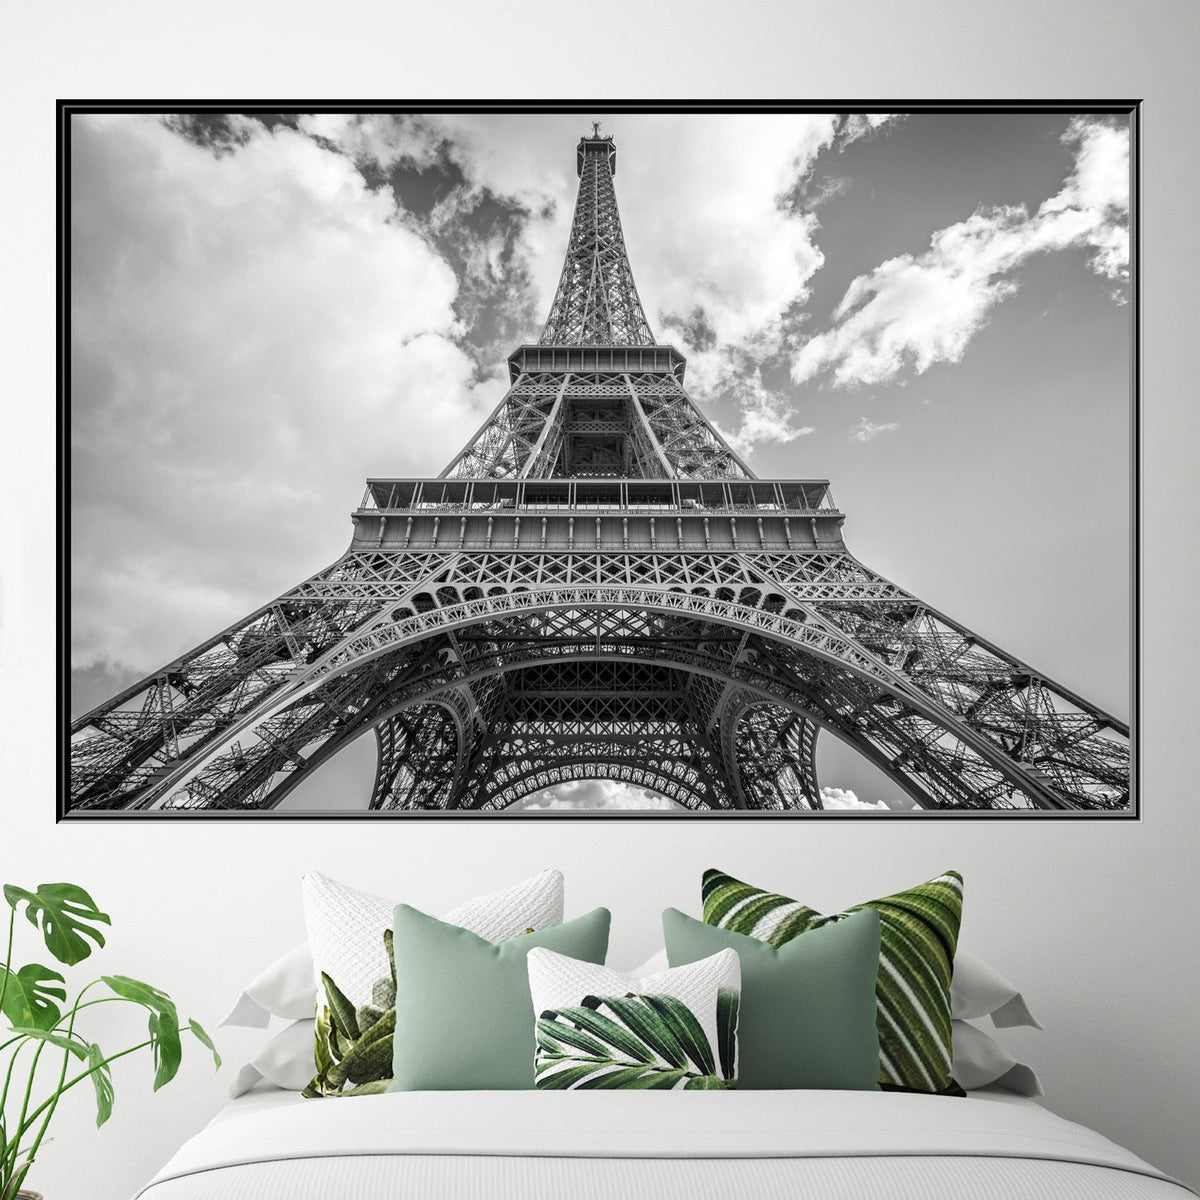 https://cdn.shopify.com/s/files/1/0387/9986/8044/products/TheIconicEiffelTowerCanvasArtprintFloatingFrame-2.jpg